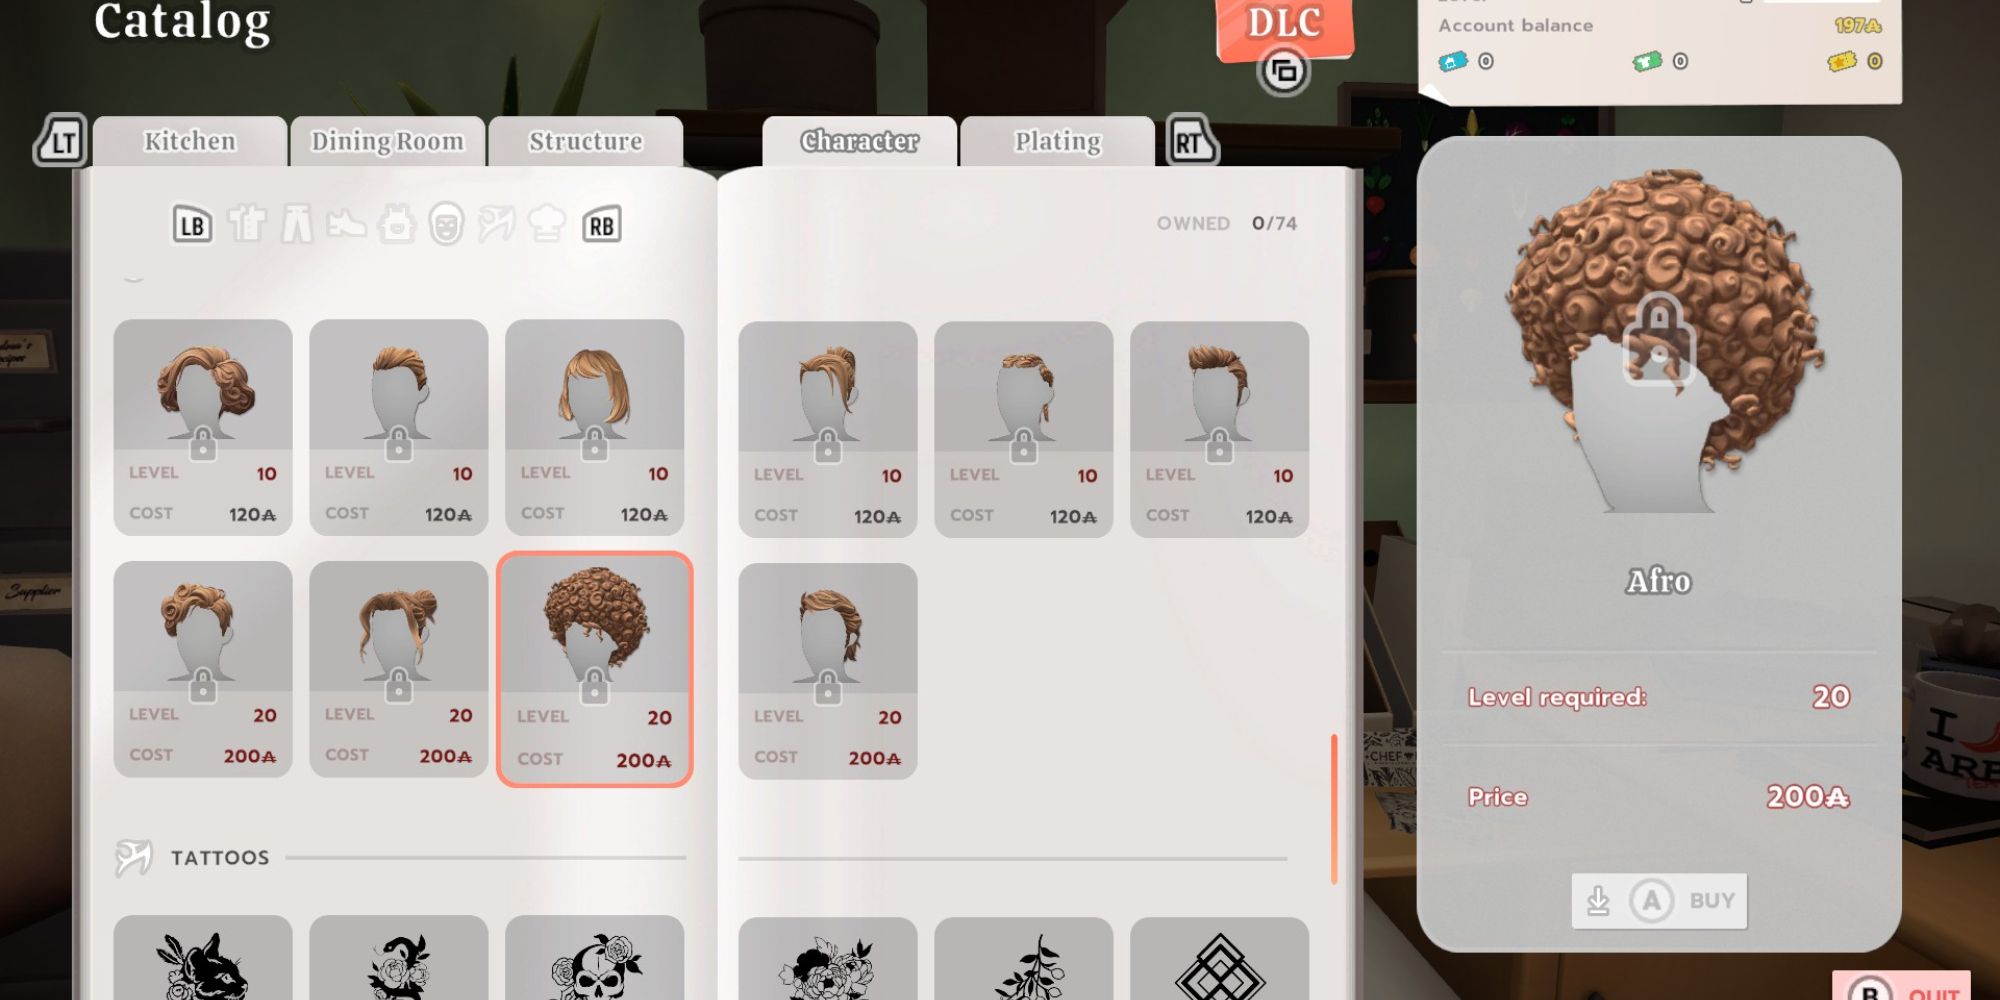 hair options for player in catalog